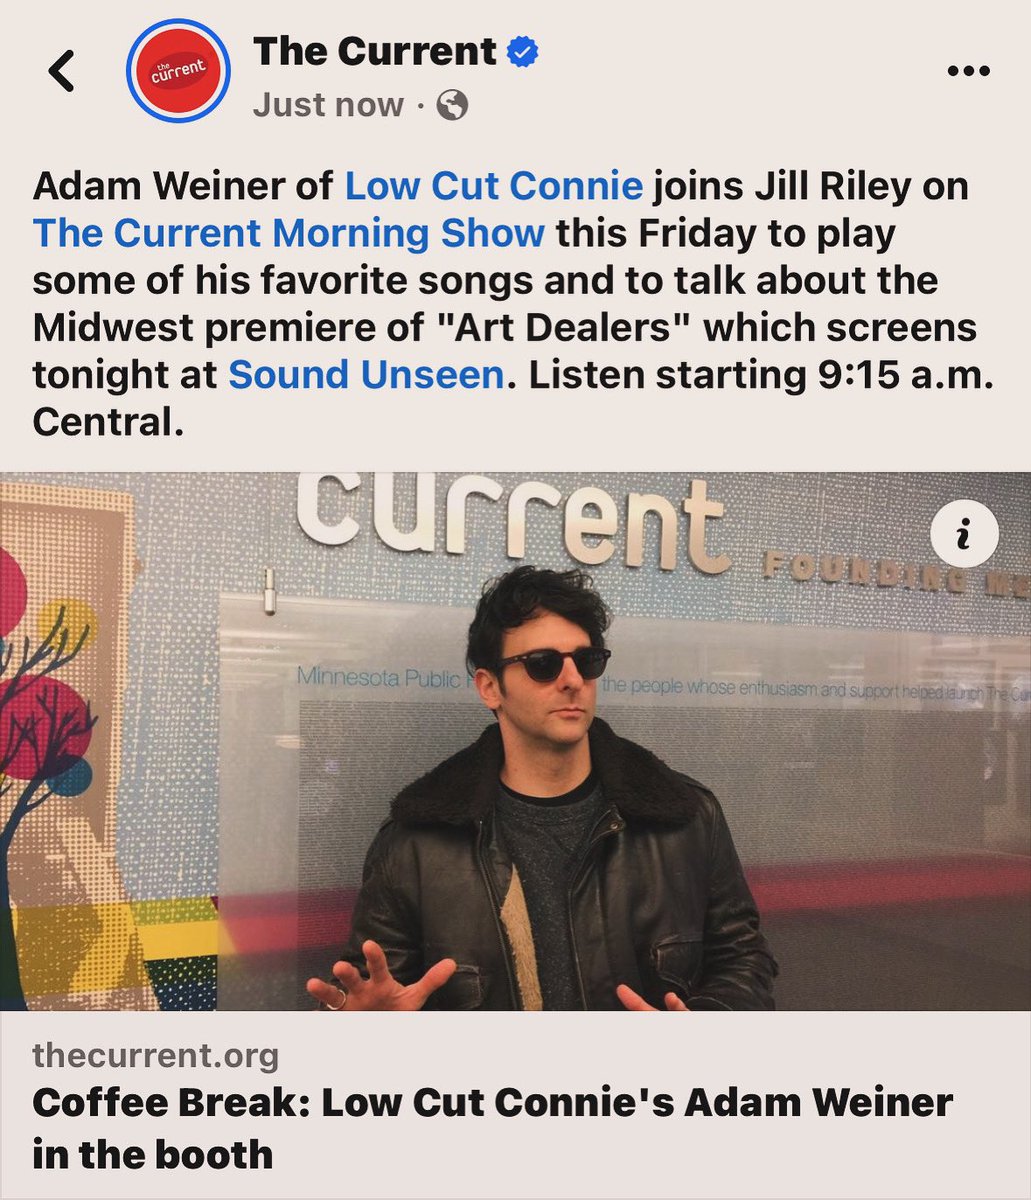 Listen to the thecurrent.org NOW and get hyped for Adam Weiner/ @LowCutConnie screening, acoustic set, and DJ set @SoundUnseen this weekend! More info at soundunseen.com